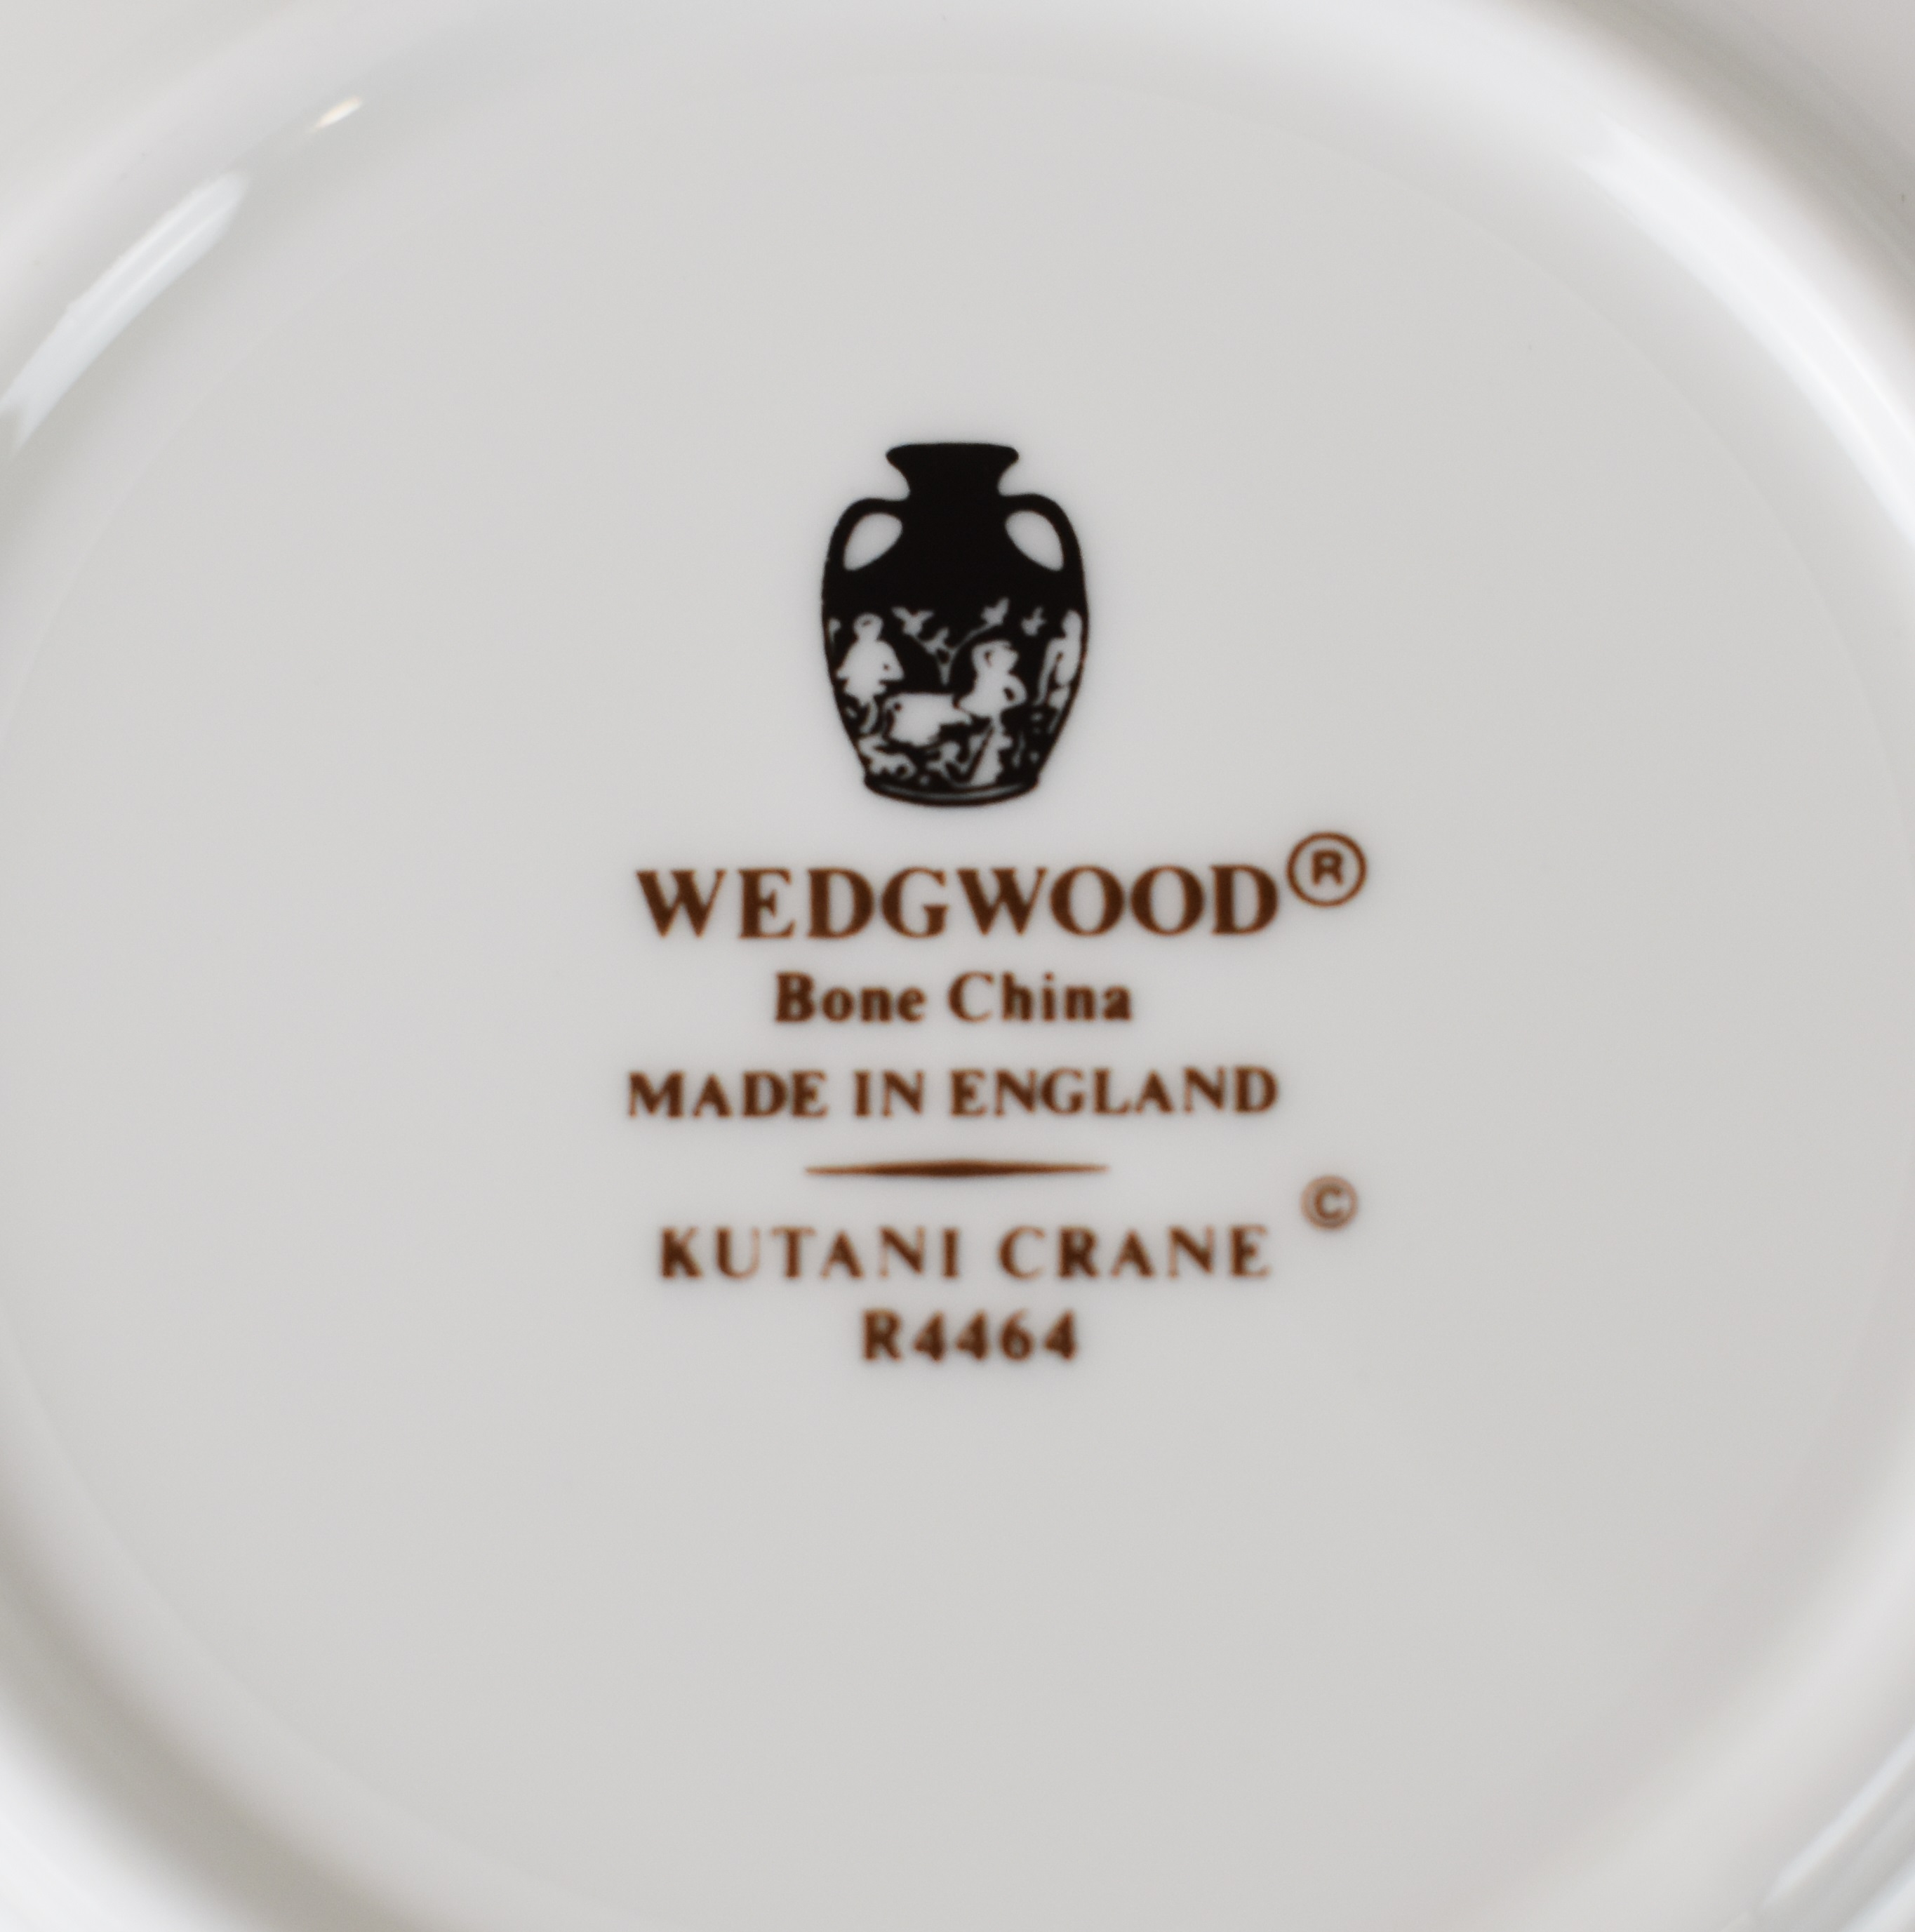 Wedgwood porcelain coffee set for ten, decorated in the Kutani Crane pattern, tallest 27cm - Image 5 of 16